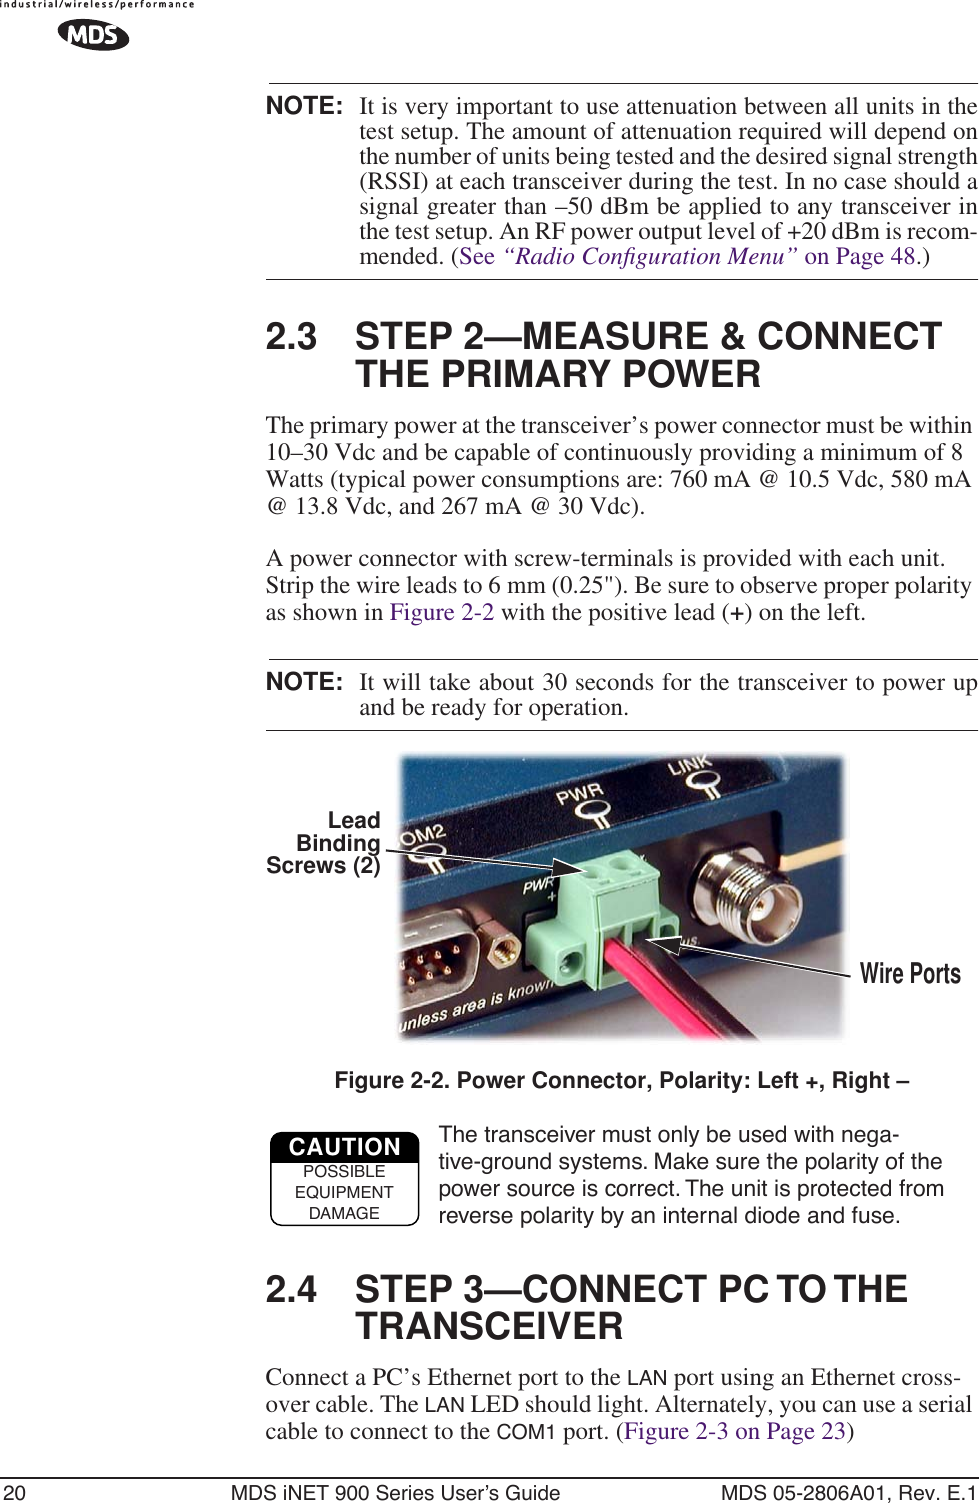 20 MDS iNET 900 Series User’s Guide MDS 05-2806A01, Rev. E.1NOTE: It is very important to use attenuation between all units in thetest setup. The amount of attenuation required will depend onthe number of units being tested and the desired signal strength(RSSI) at each transceiver during the test. In no case should asignal greater than –50 dBm be applied to any transceiver inthe test setup. An RF power output level of +20 dBm is recom-mended. (See “Radio Conﬁguration Menu” on Page 48.)2.3 STEP 2—MEASURE &amp; CONNECT THE PRIMARY POWERThe primary power at the transceiver’s power connector must be within 10–30 Vdc and be capable of continuously providing a minimum of 8 Watts (typical power consumptions are: 760 mA @ 10.5 Vdc, 580 mA @ 13.8 Vdc, and 267 mA @ 30 Vdc).A power connector with screw-terminals is provided with each unit. Strip the wire leads to 6 mm (0.25&quot;). Be sure to observe proper polarity as shown in Figure 2-2 with the positive lead (+) on the left.NOTE: It will take about 30 seconds for the transceiver to power upand be ready for operation.Invisible place holderFigure 2-2. Power Connector, Polarity: Left +, Right –The transceiver must only be used with nega-tive-ground systems. Make sure the polarity of the power source is correct. The unit is protected from reverse polarity by an internal diode and fuse.2.4 STEP 3—CONNECT PC TO THE TRANSCEIVERConnect a PC’s Ethernet port to the LAN port using an Ethernet cross-over cable. The LAN LED should light. Alternately, you can use a serial cable to connect to the COM1 port. (Figure 2-3 on Page 23)Wire PortsLeadScrews (2)BindingCAUTIONPOSSIBLEEQUIPMENTDAMAGE